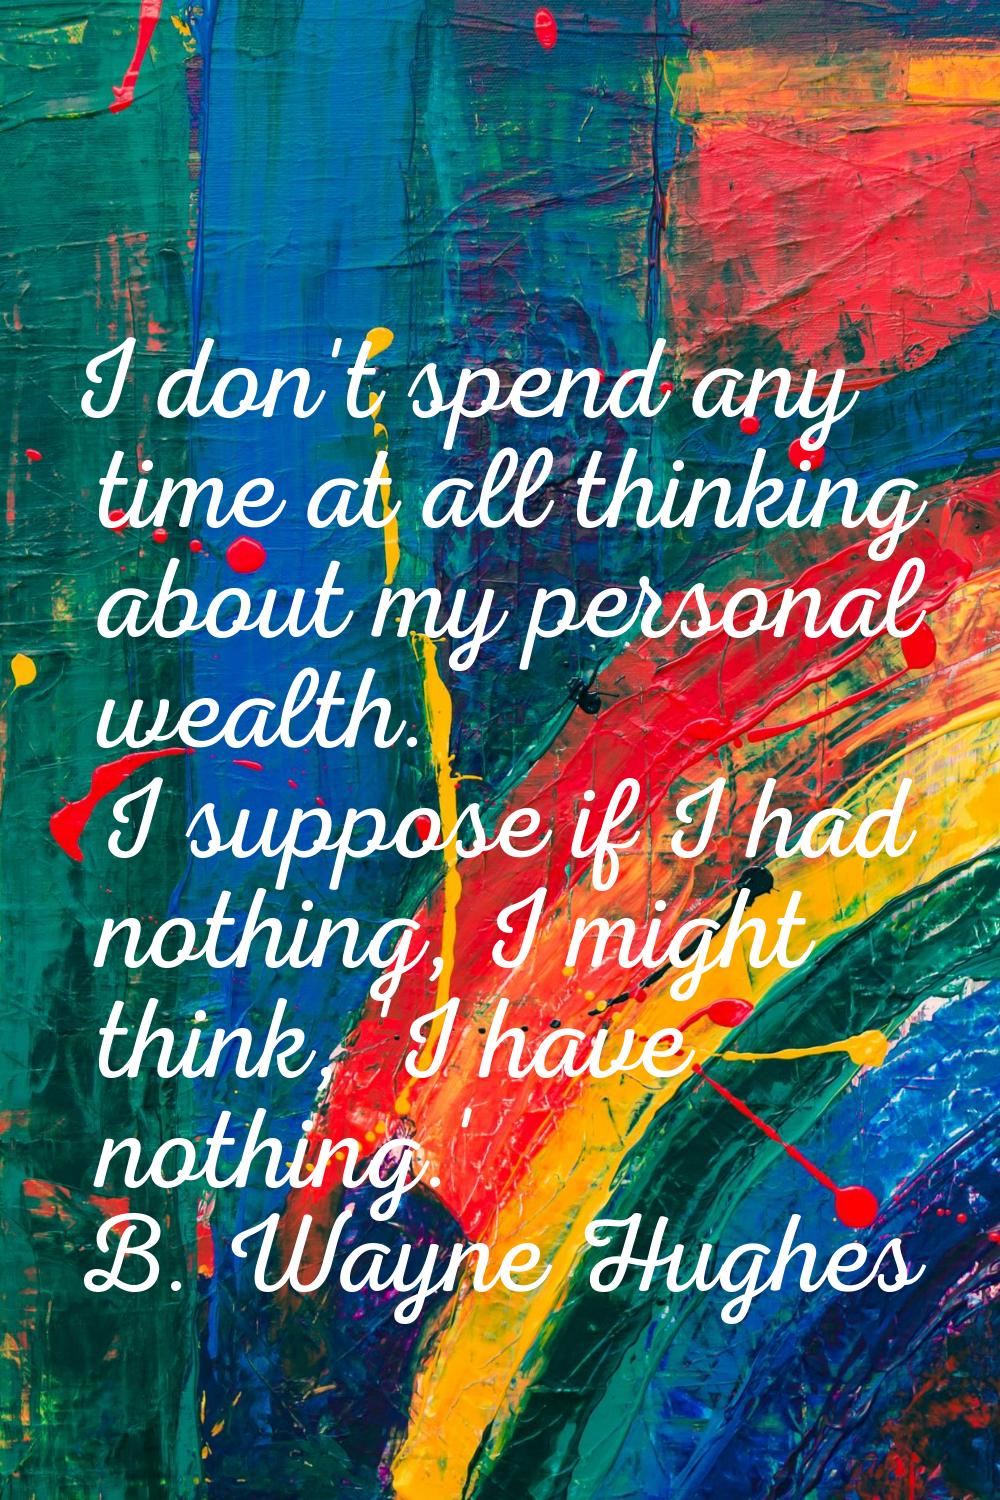 I don't spend any time at all thinking about my personal wealth. I suppose if I had nothing, I migh